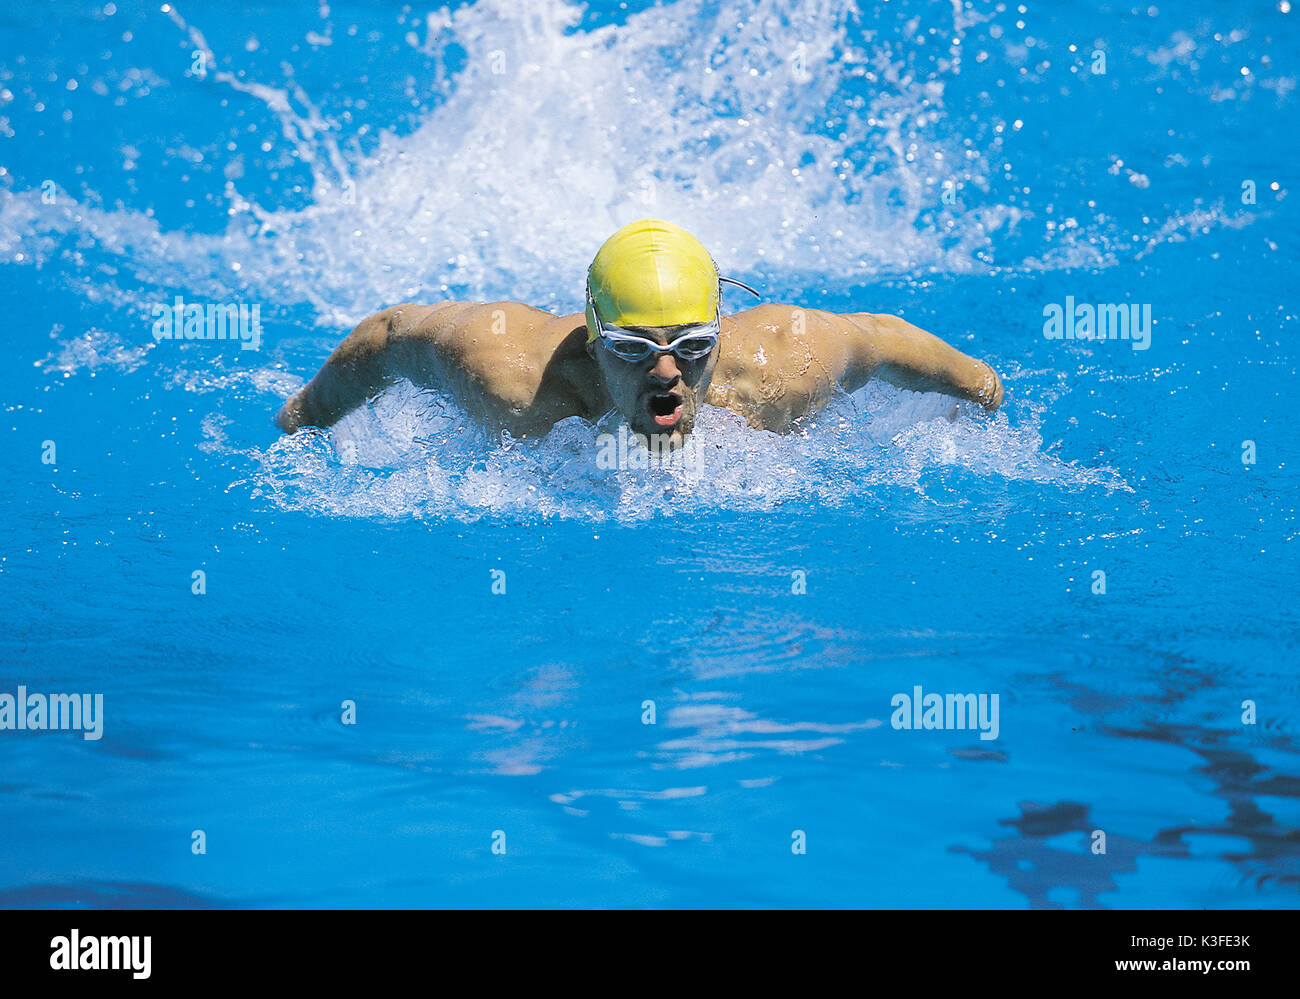 swimmer in the sports pool Stock Photo